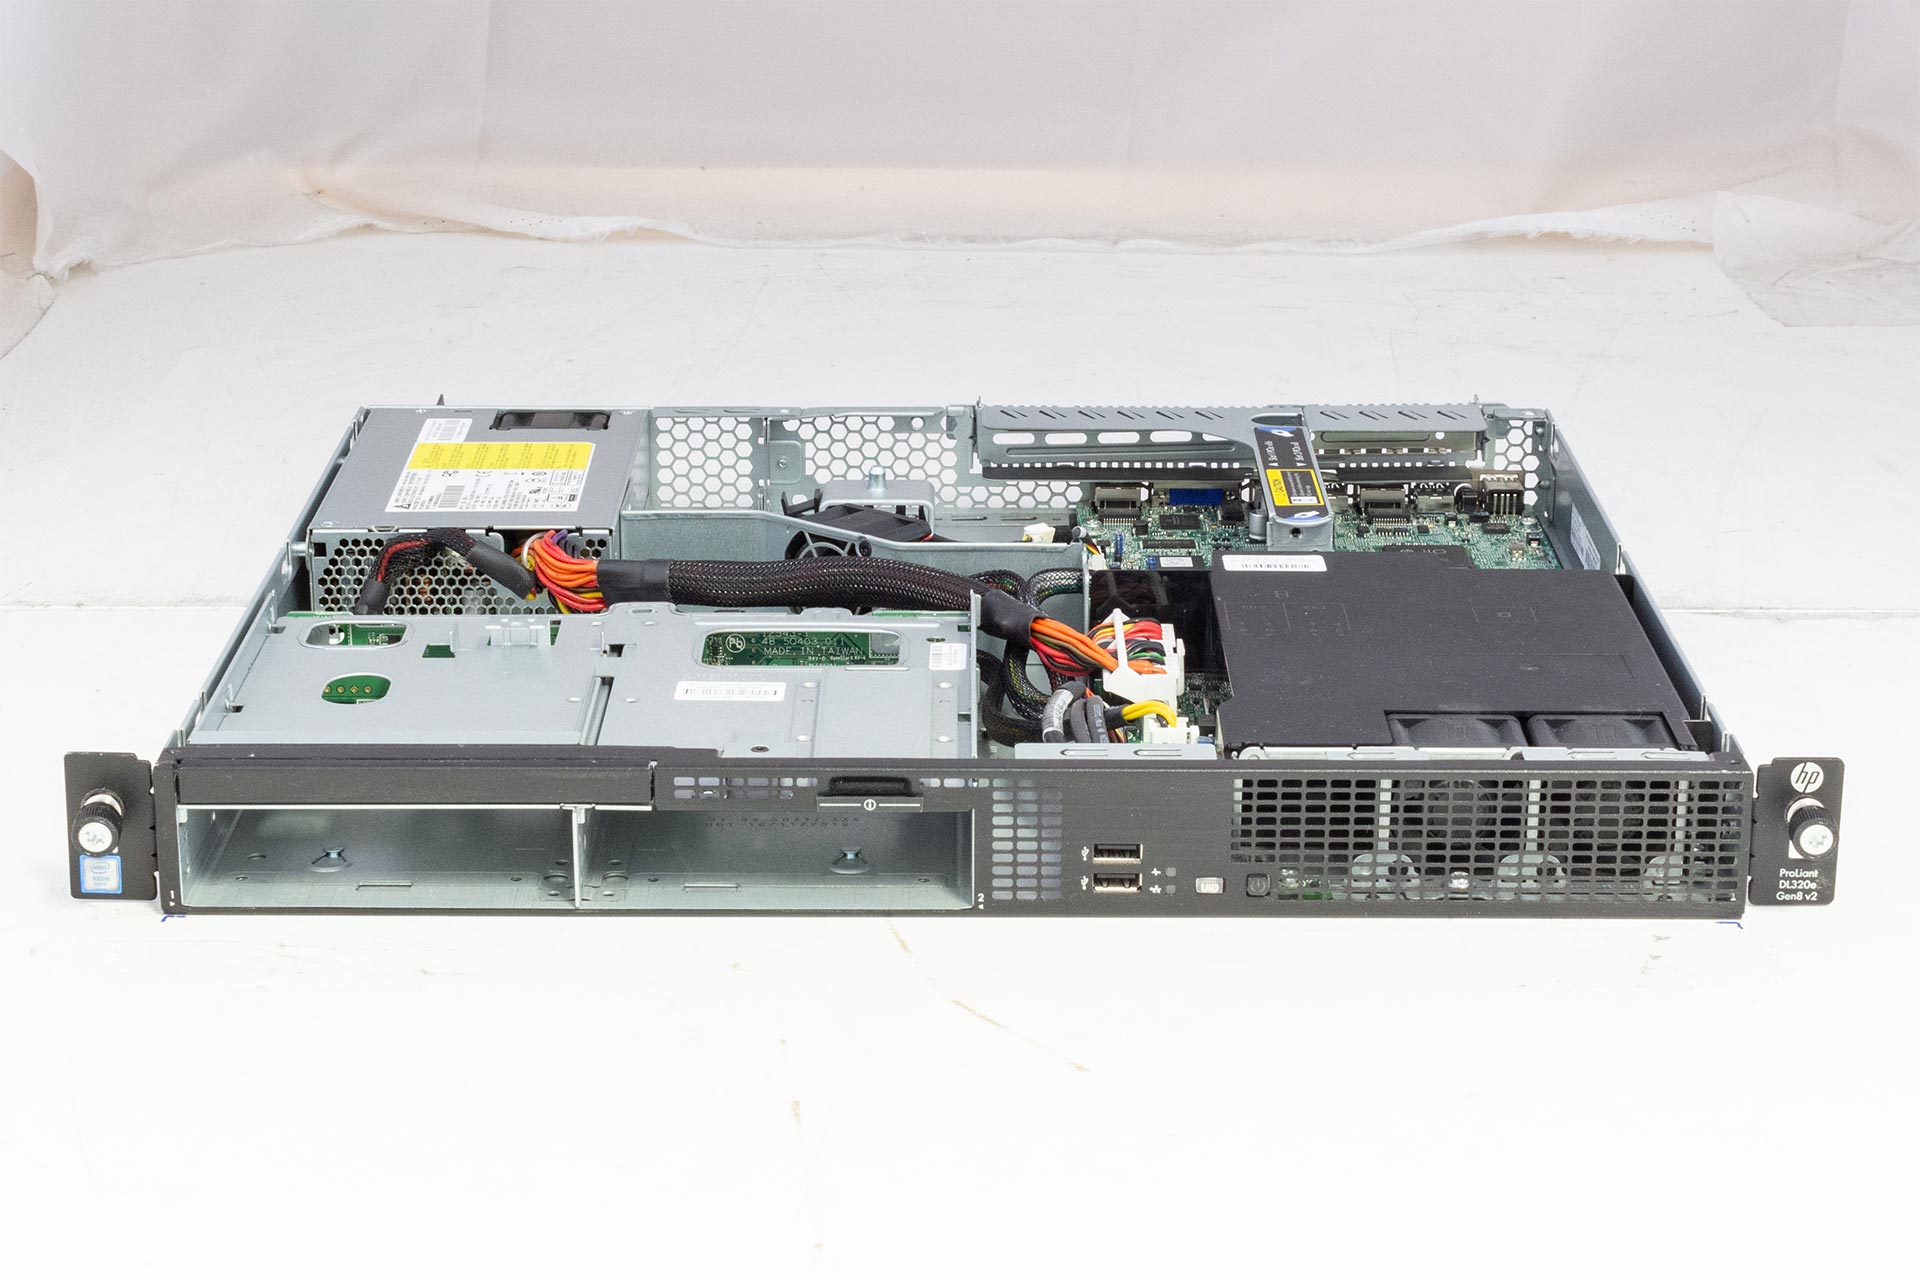 HPE-DL320e-Gen8-v2-1x-E3-1220v3-3.1GHz-4-Core-8GB-PC3-12800-2xLFF-SATA-B120i-1x250W-front-open